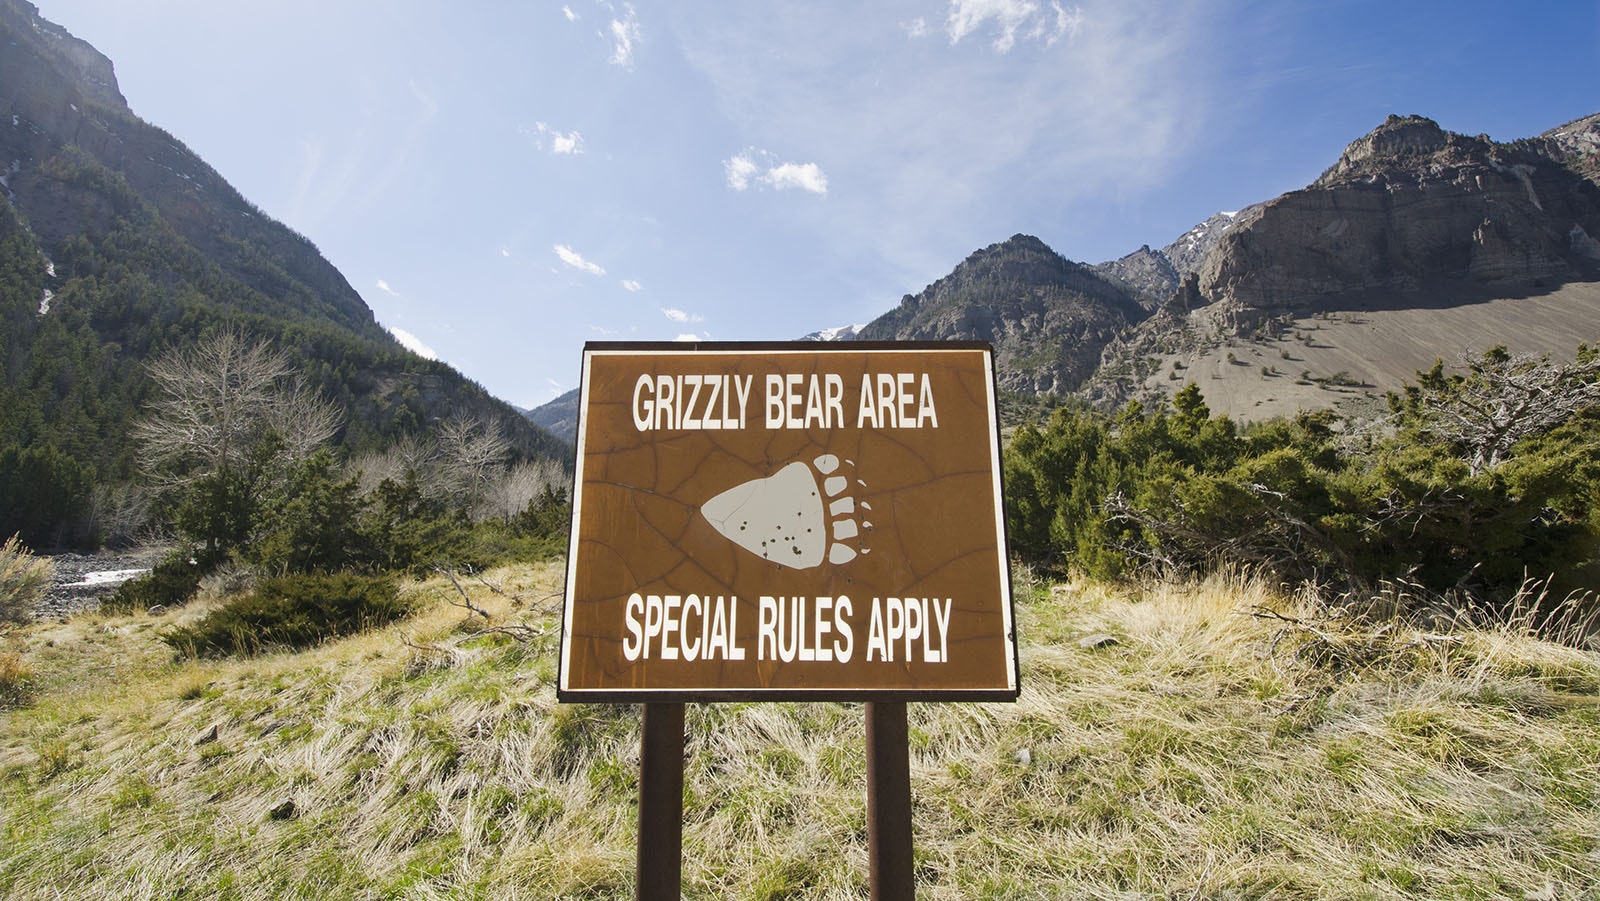 Grizzly area 5 24 23